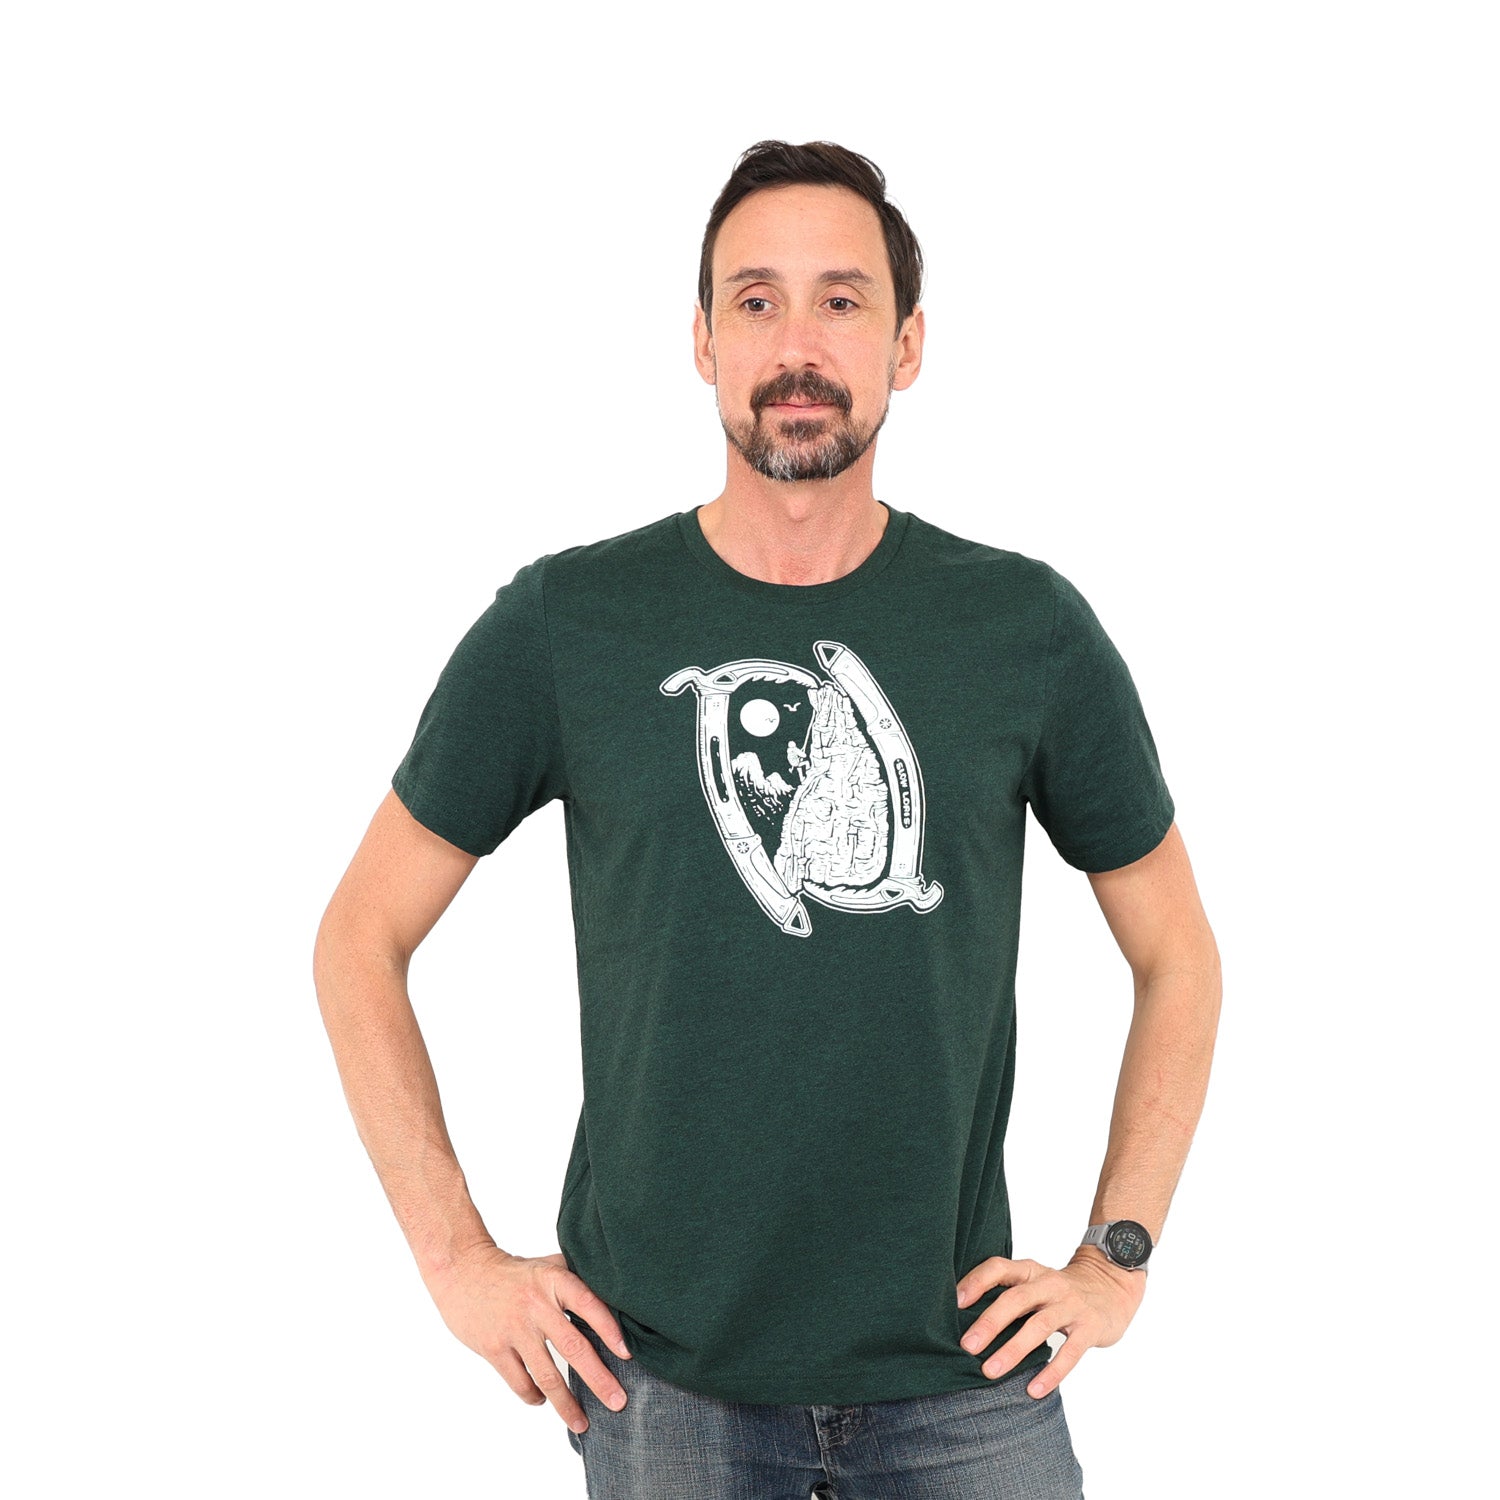 Man standing with hands on his hips with a whitebackground while wearing a green t-shirt with ice Axes framing a climbing scene.